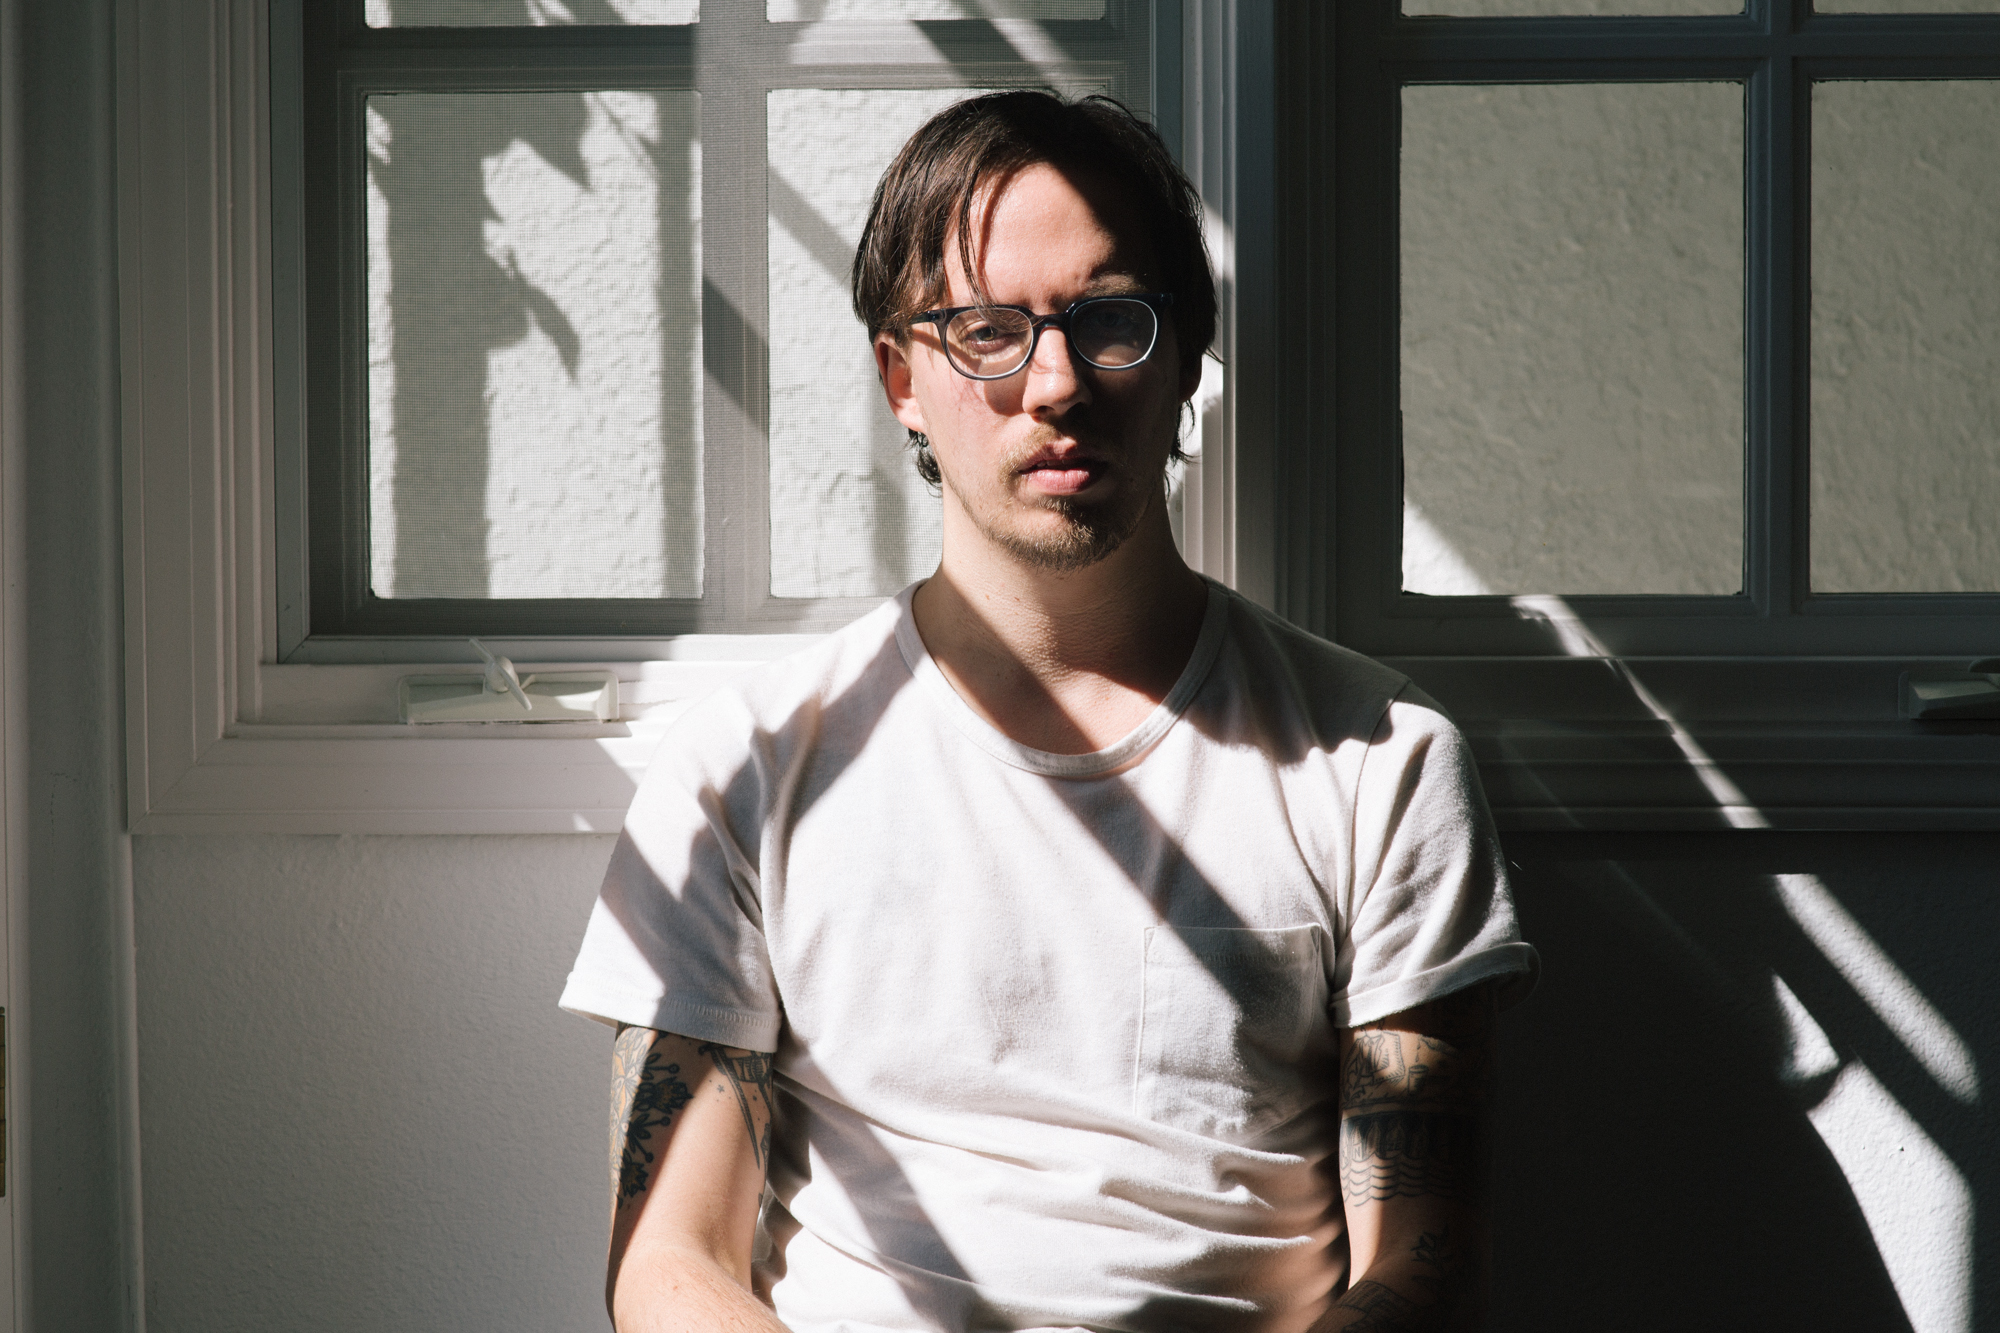 North Americans announces "Legends" for Driftless Recordings, shares new track "Lux."